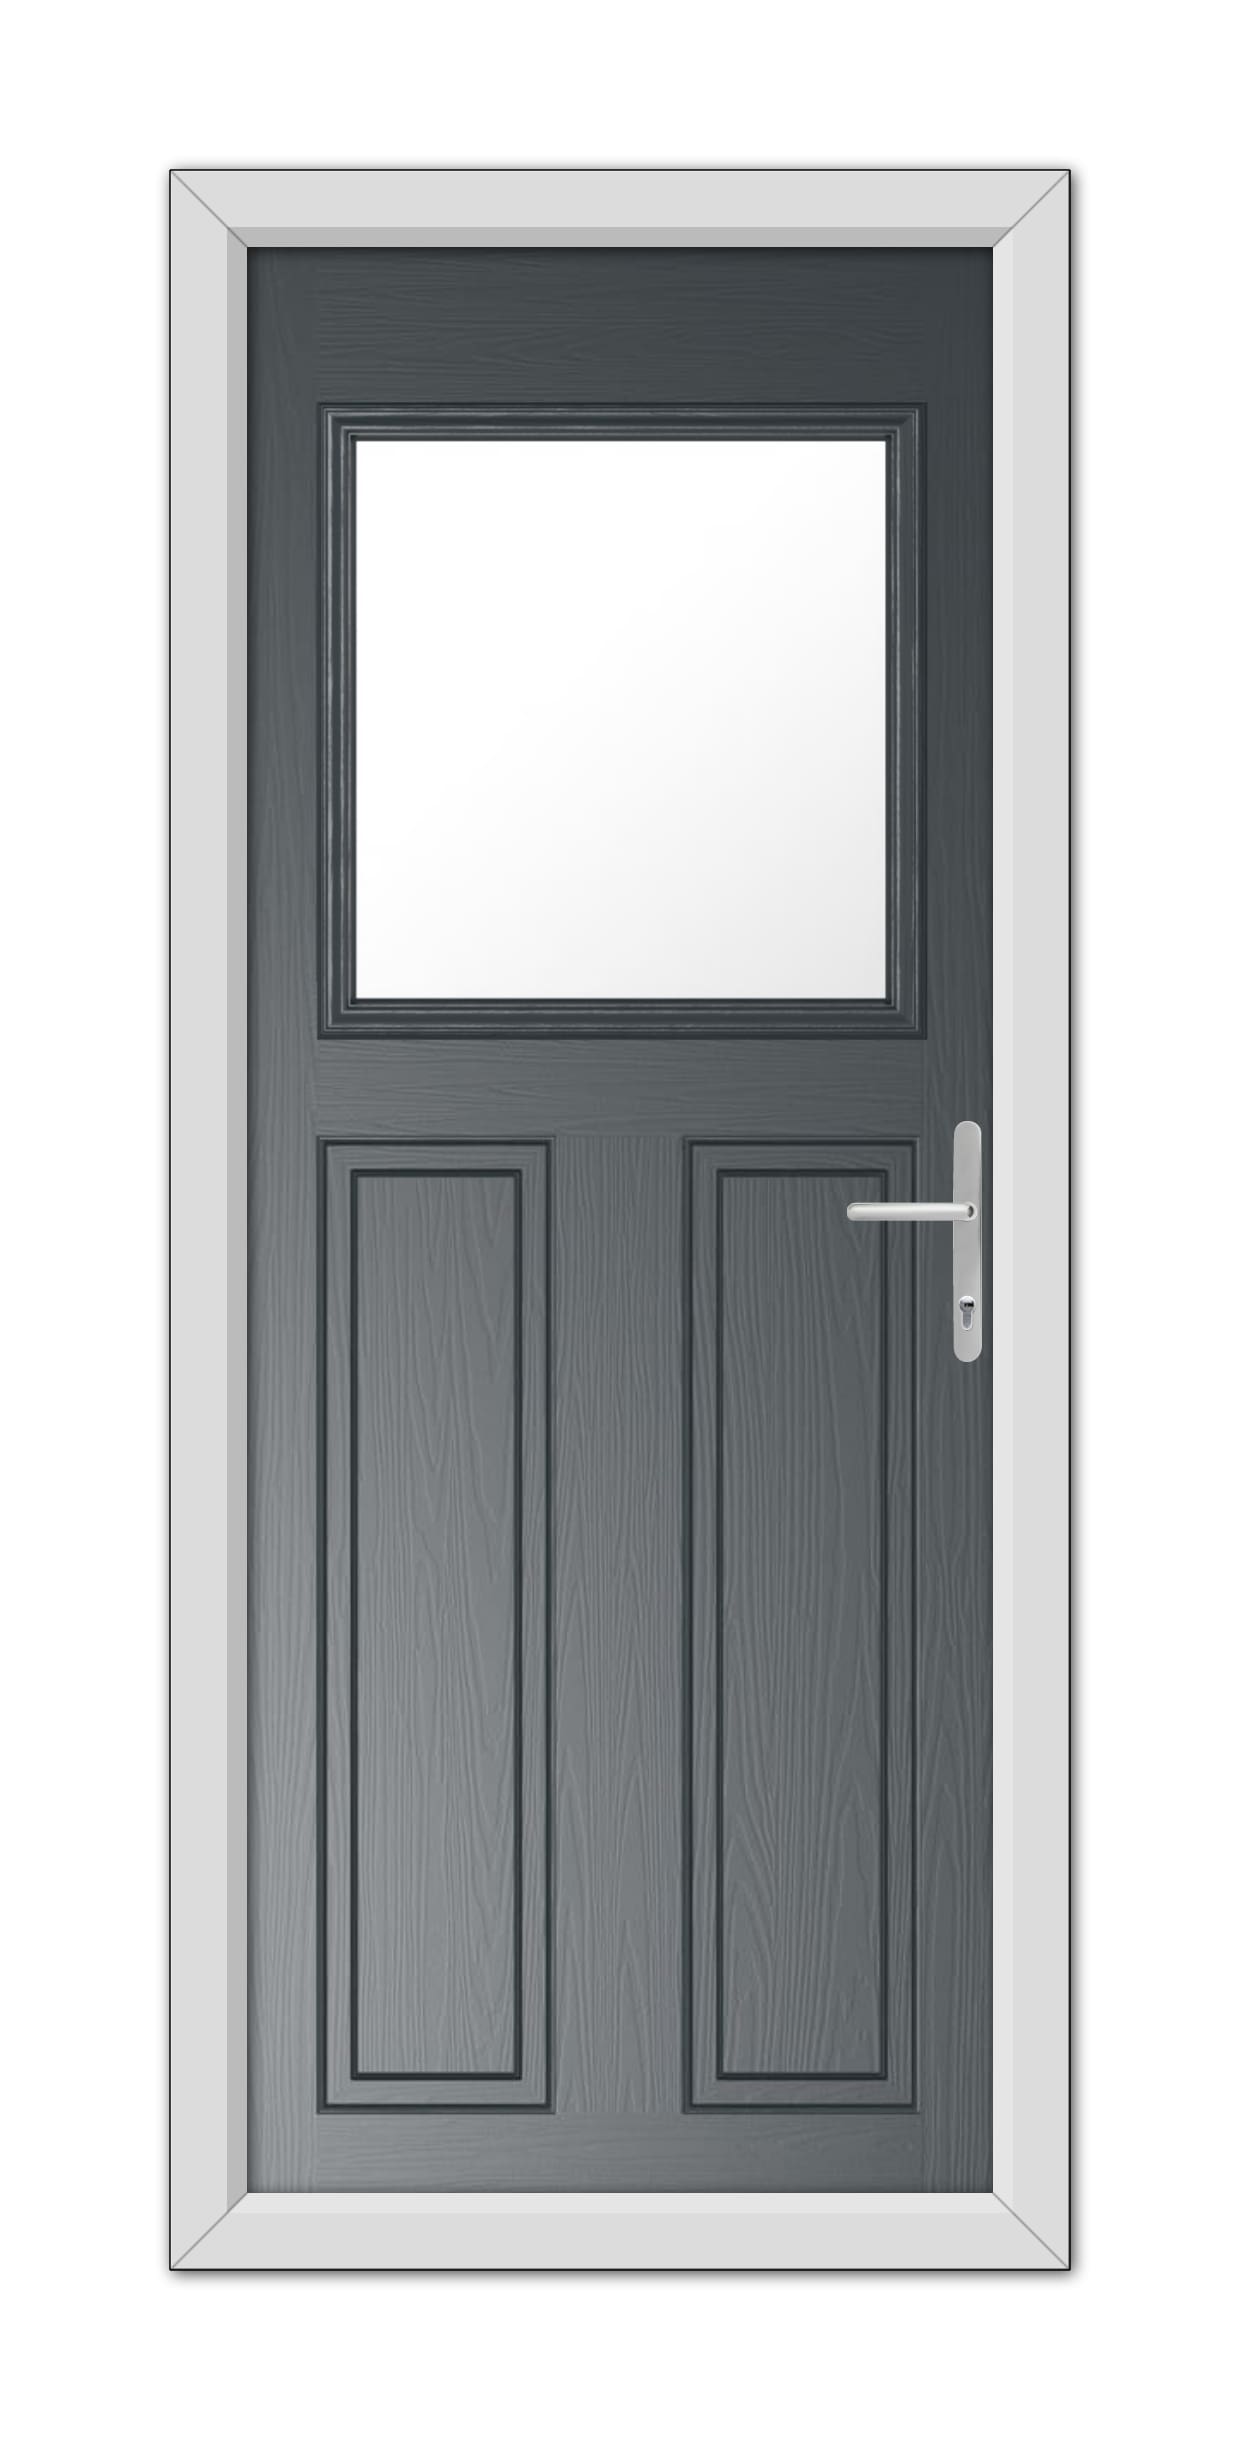 A modern Anthracite Grey Axwell Composite Door 48mm Timber Core featuring a small rectangular window at the top and a stainless steel handle on the right side, set within a white frame.